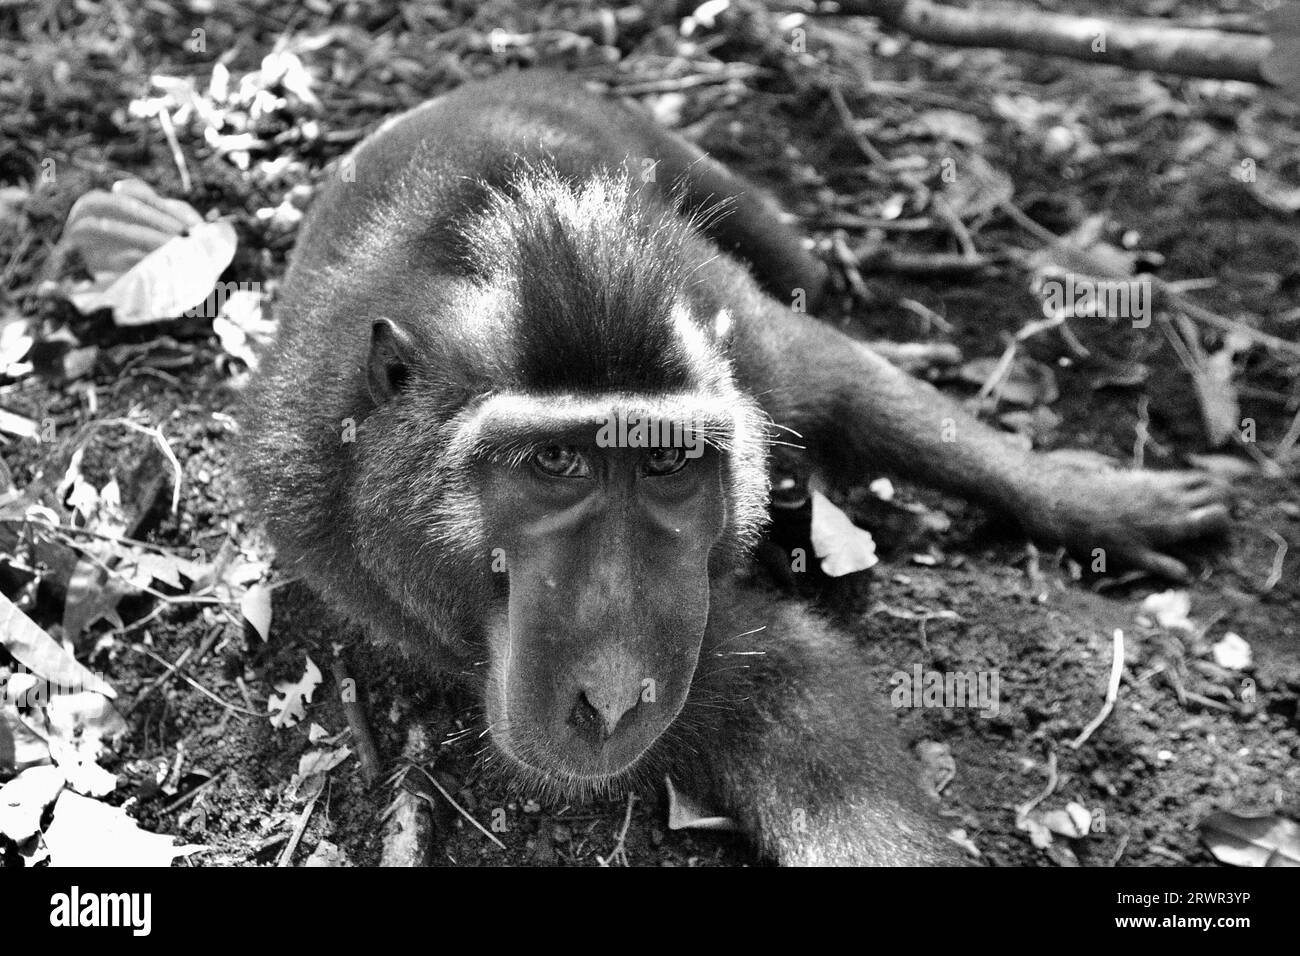 A crested macaque (Macaca nigra) stares at camera as it is photographed while lying on the ground in Tangkoko forest, North Sulawesi, Indonesia. A recent report by a team of scientists led by Marine Joly revealed that the temperature is increasing in Tangkoko forest, and the overall fruit abundance decreased. 'Between 2012 and 2020, temperatures increased by up to 0.2 degree Celsius per year in the forest, and the overall fruit abundance decreased by 1 percent per year,” they wrote on International Journal of Primatology. 'In a warmer future, they would have to adjust, resting and staying in.. Stock Photo